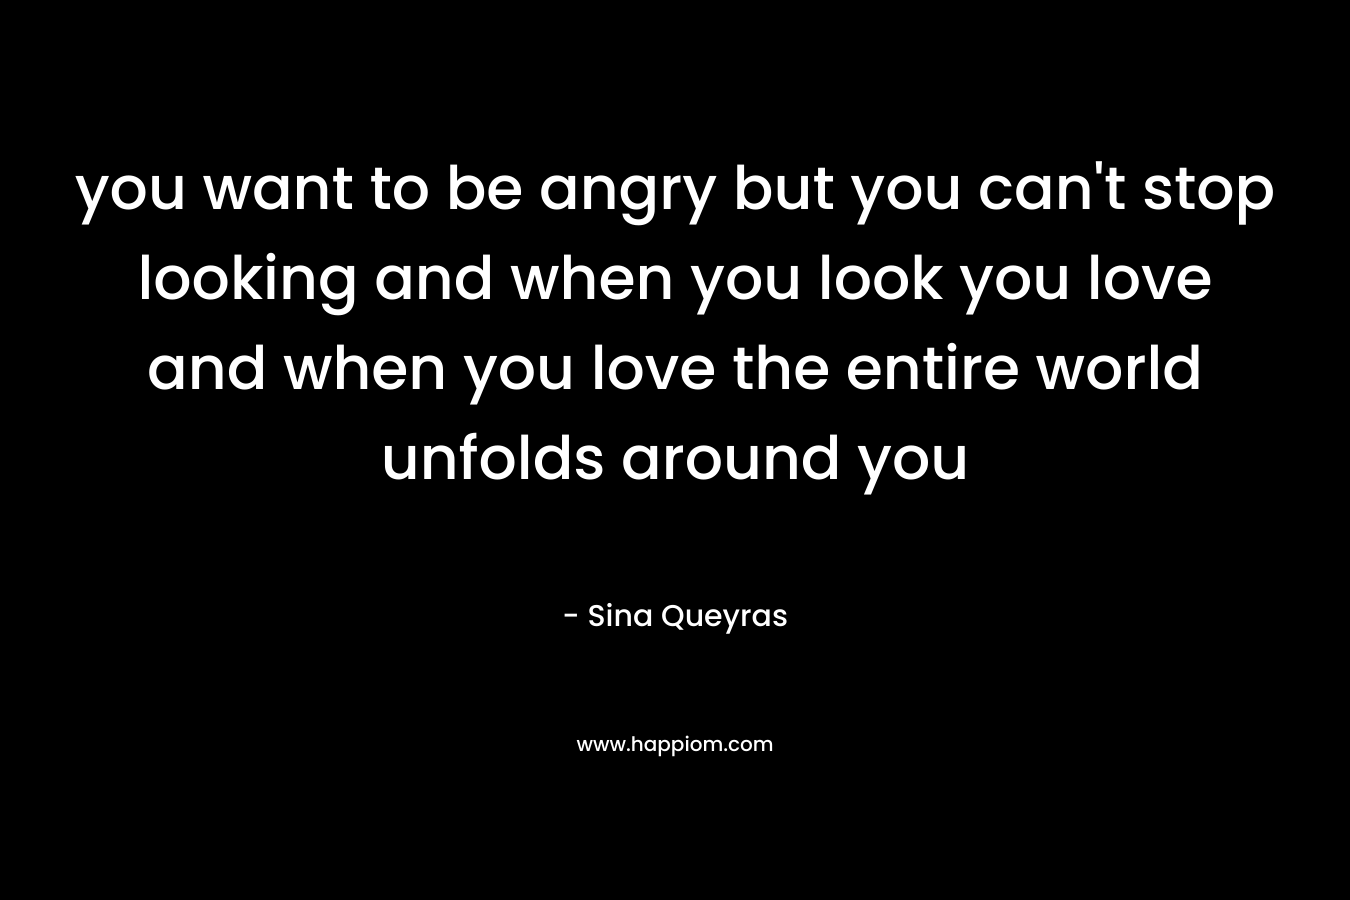 you want to be angry but you can’t stop looking and when you look you love and when you love the entire world unfolds around you – Sina Queyras